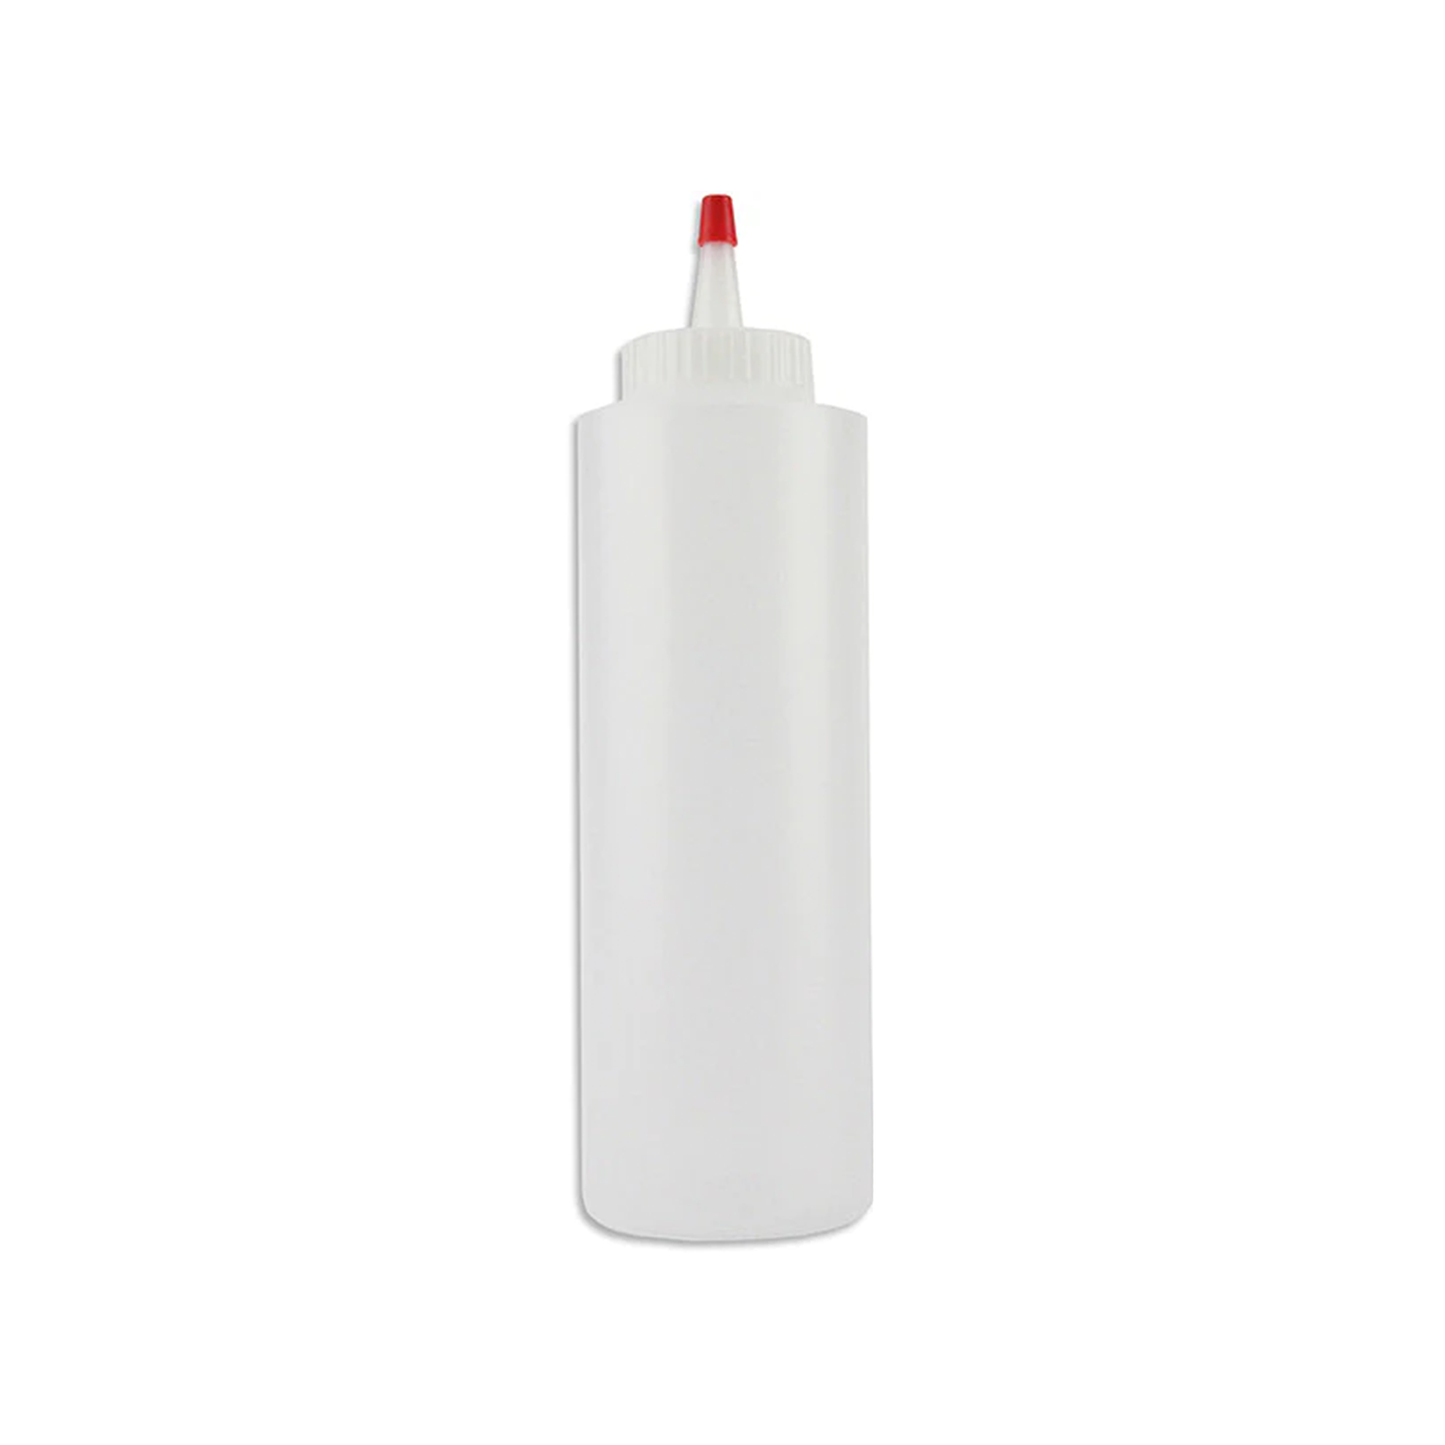 Daily Chef Translucent White Plastic Squeeze Bottles, 16 Oz, 6 Ct